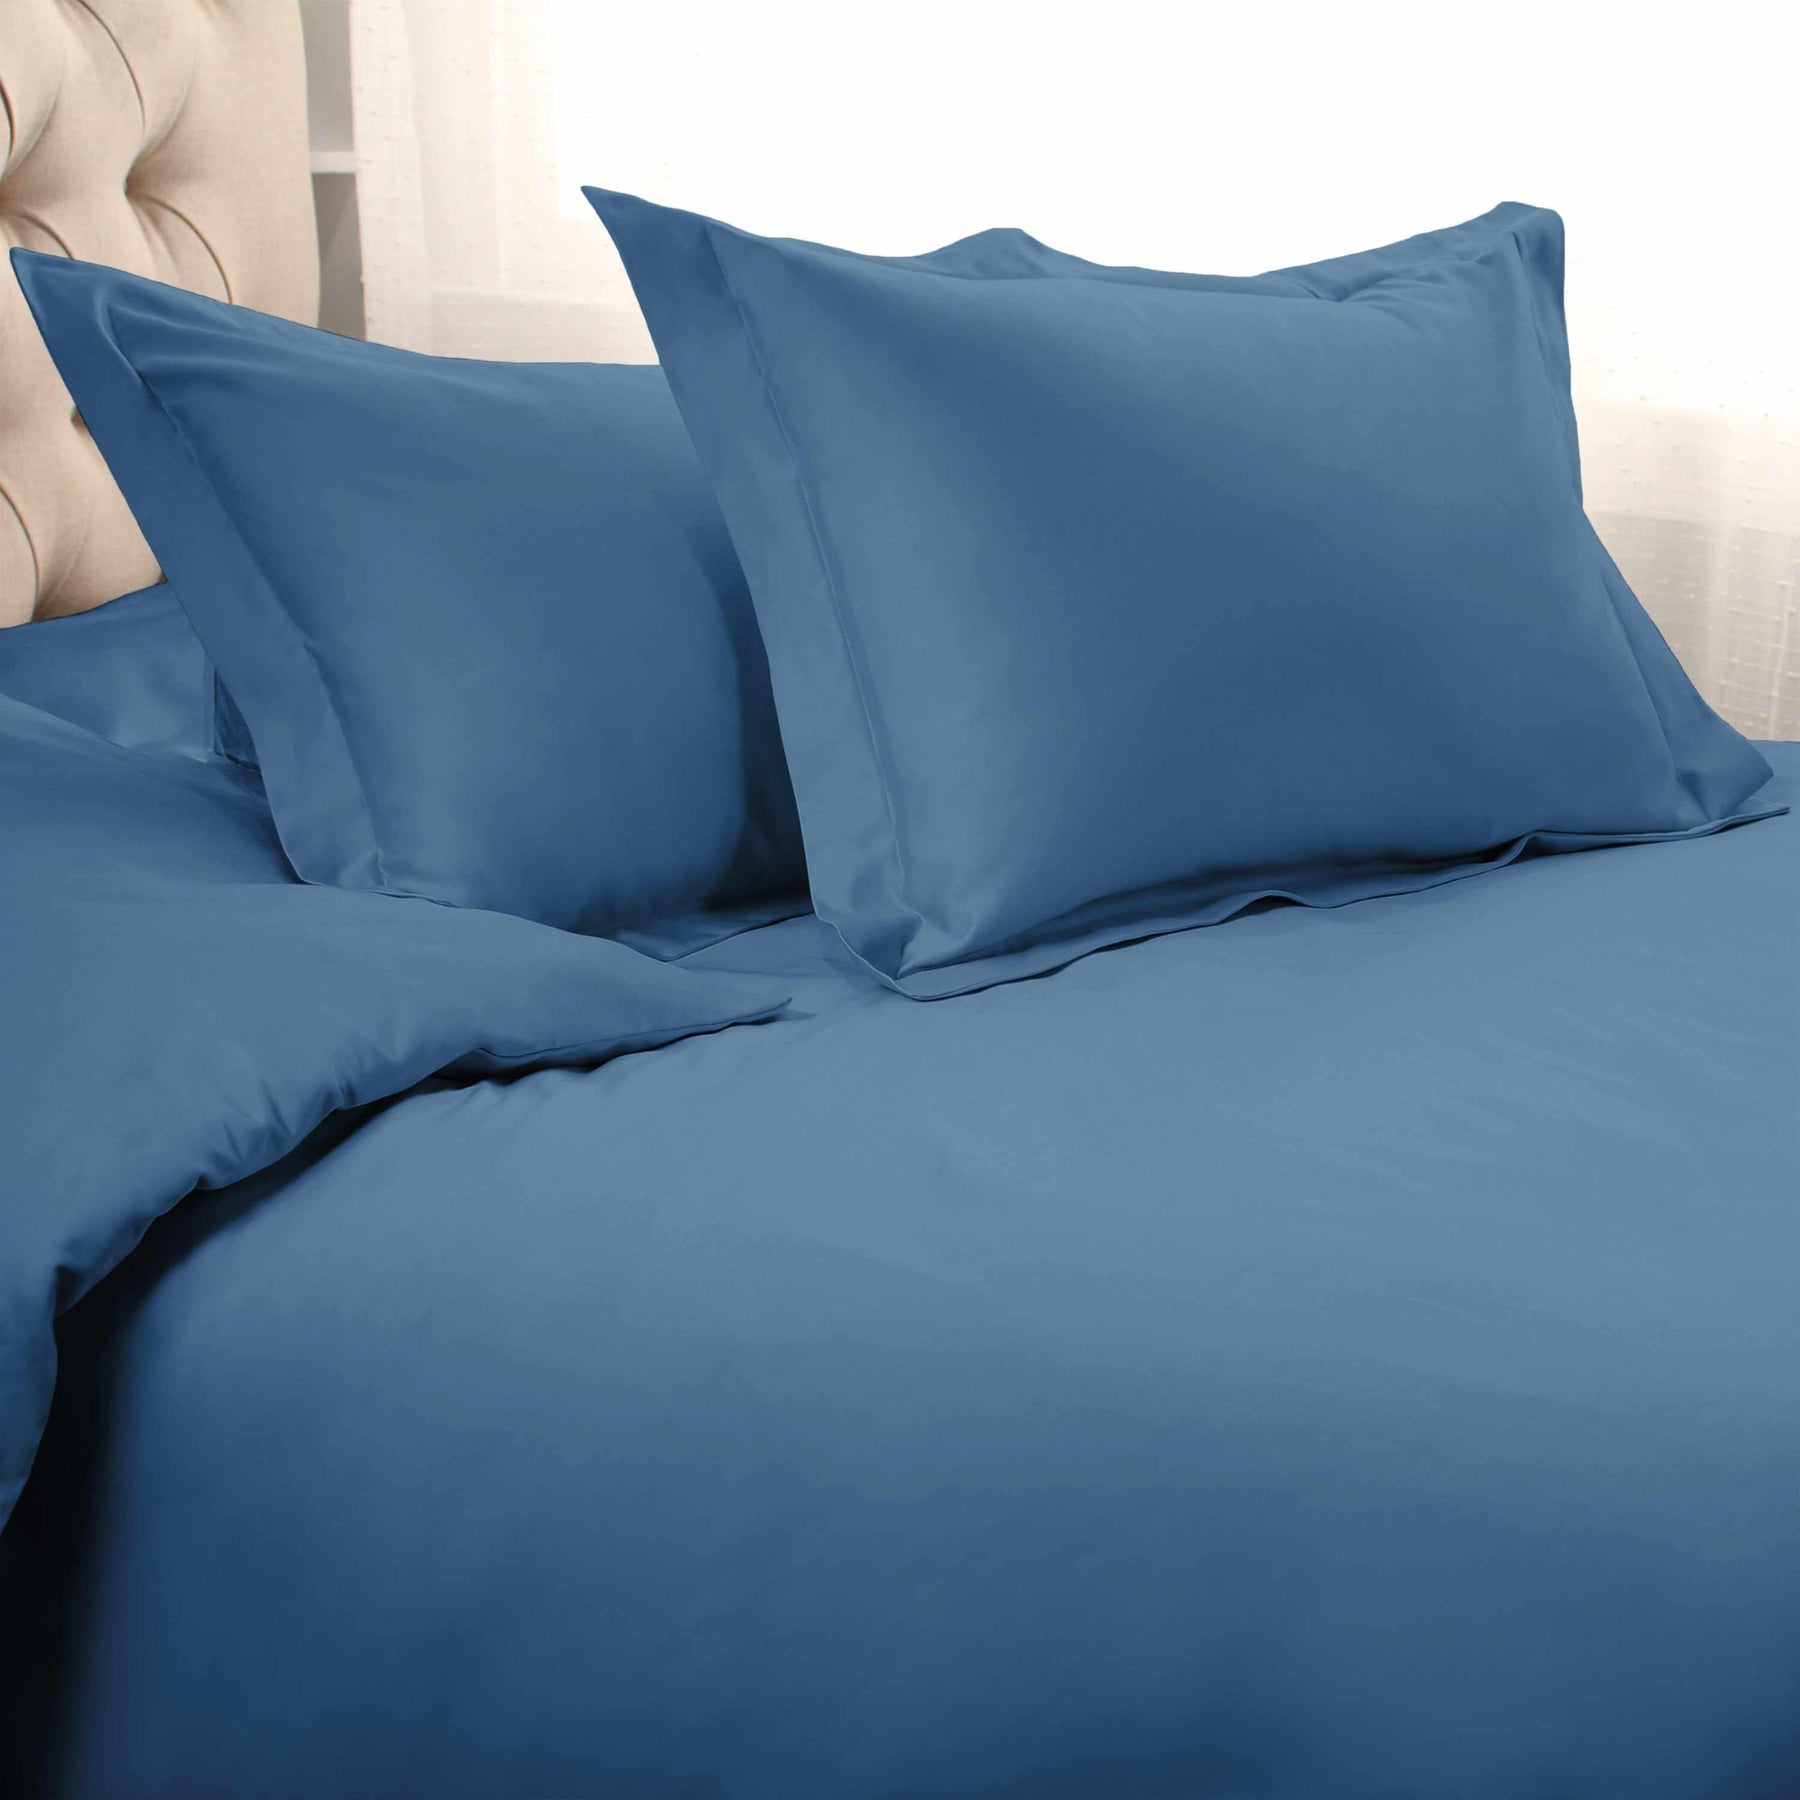  Superior Egyptian Cotton Solid All-Season Duvet Cover Set with Button Closure -  Medium Blue